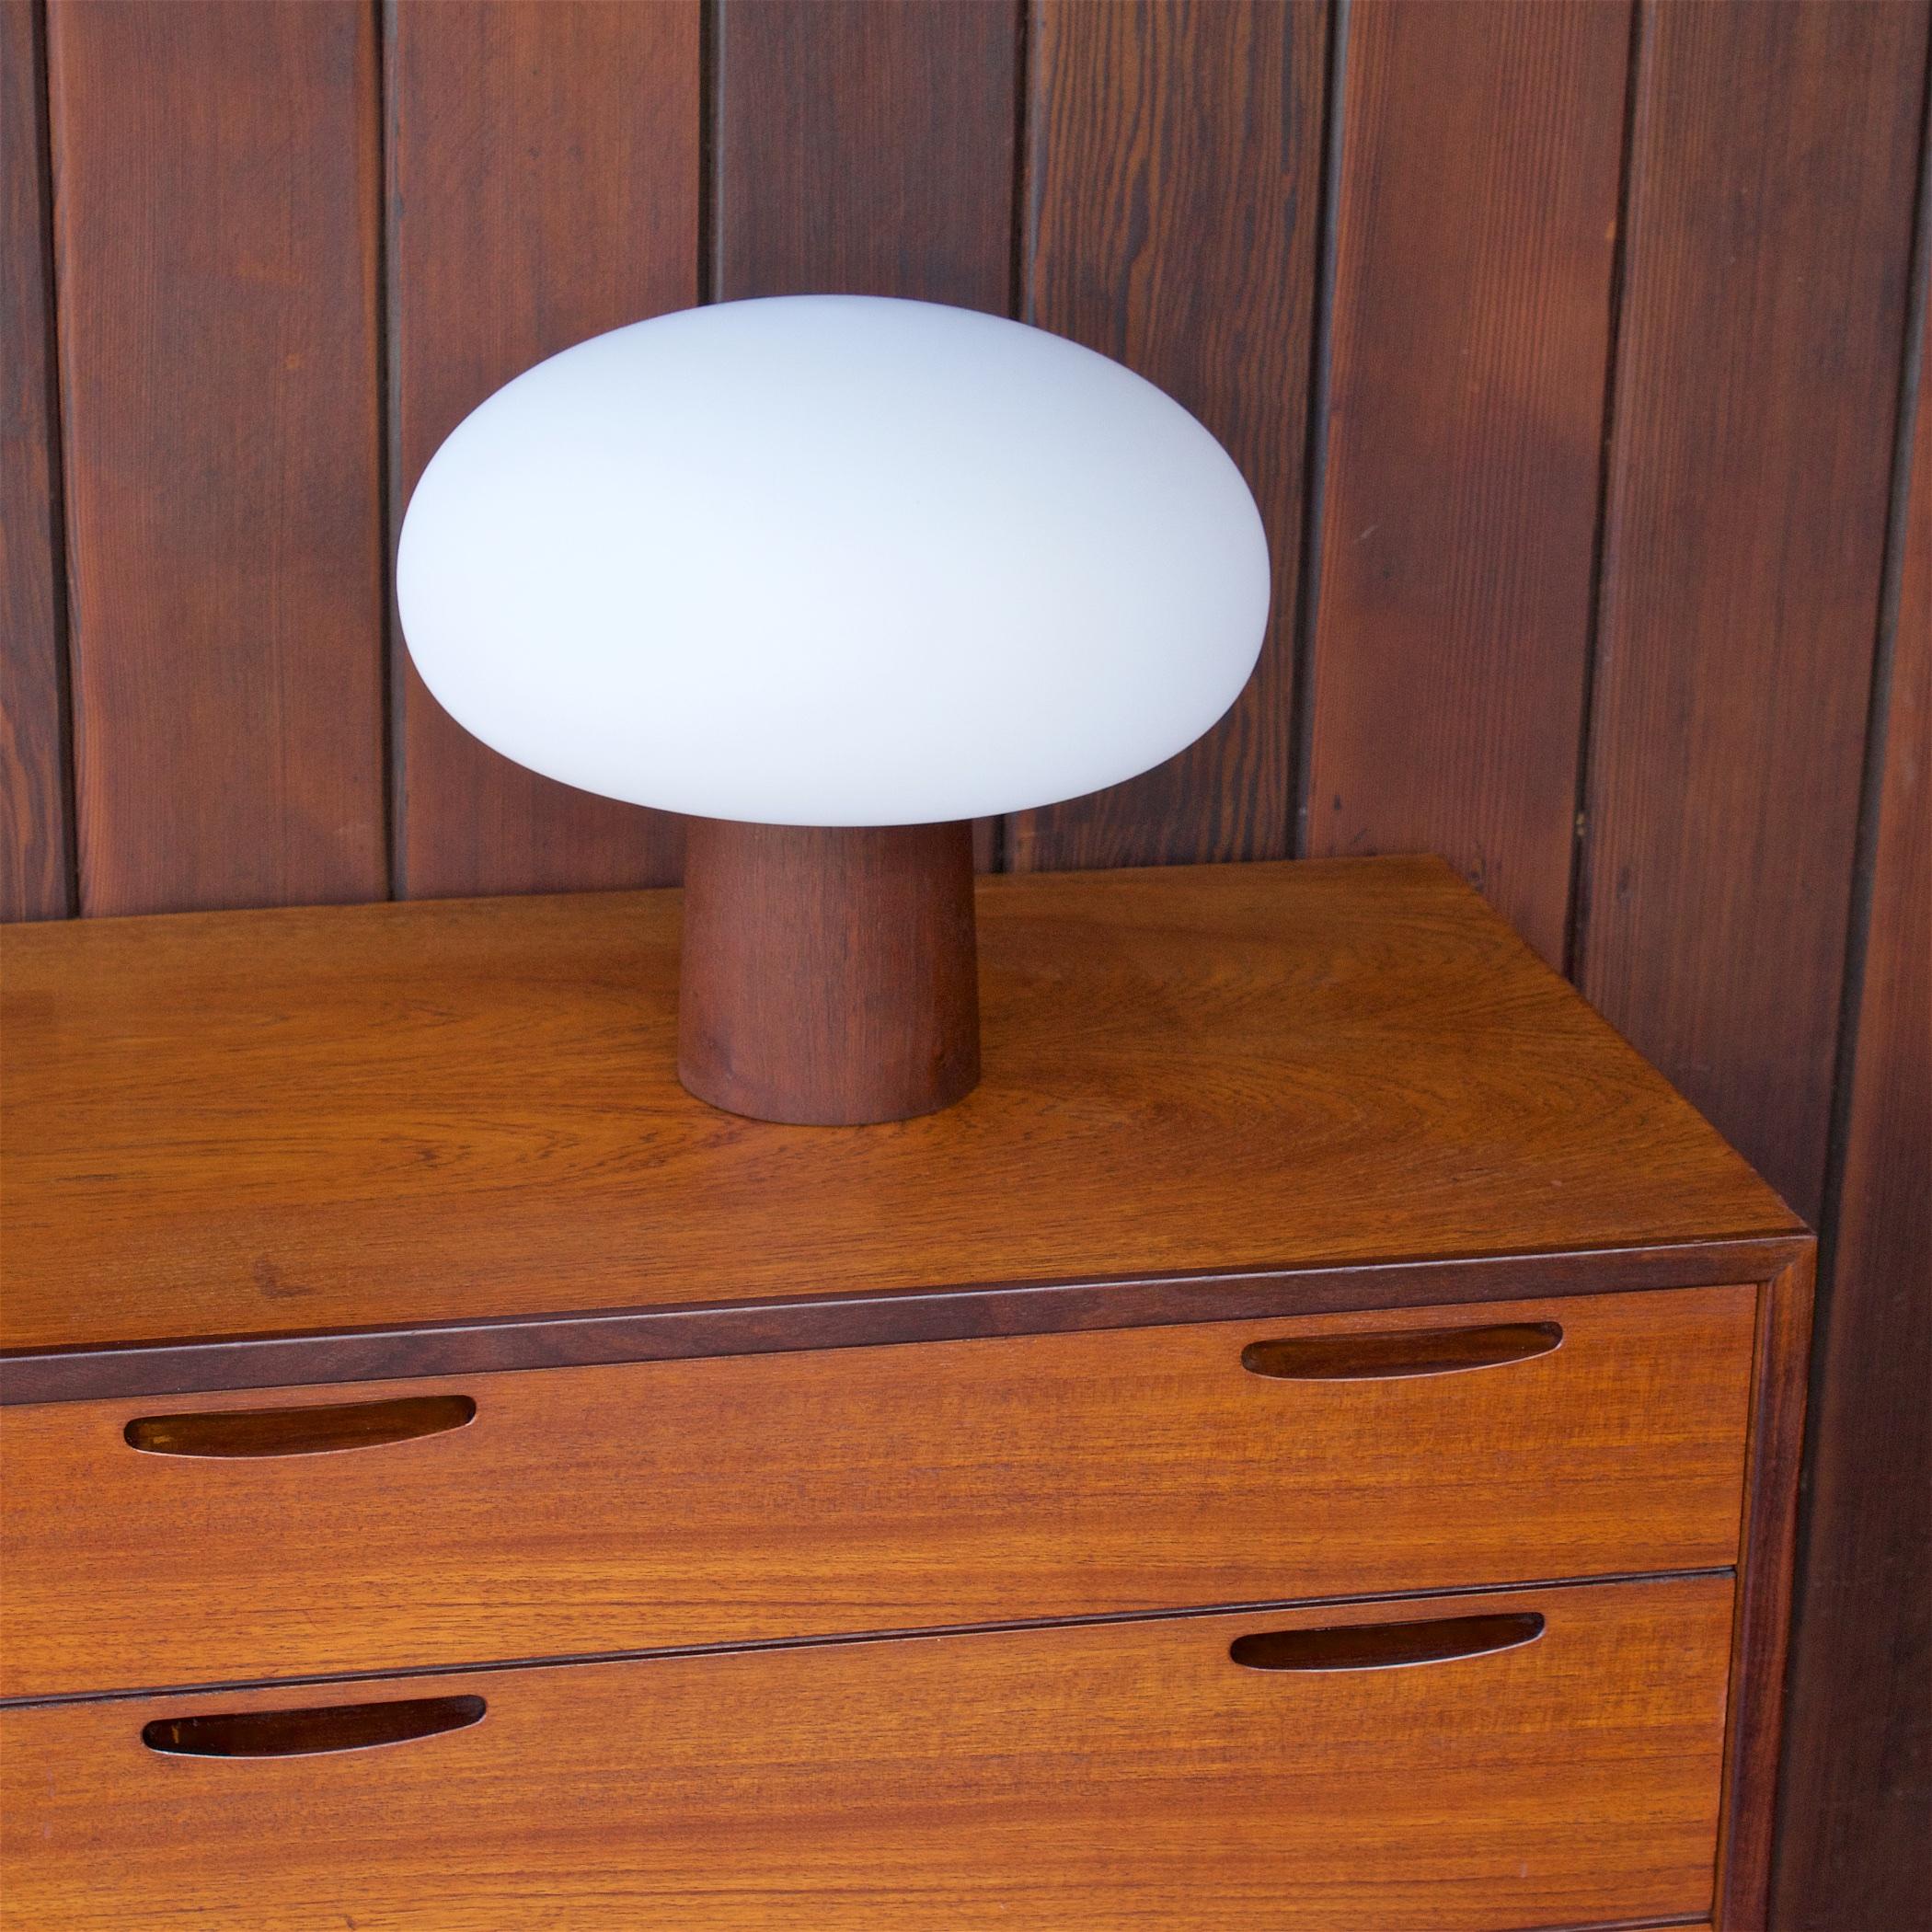 One of the rarest variation of the laurel 'mushroom lamp' series. In great working order, and good cosmetic condition, showing some wear to veneer and some very faint stains. Measures: Shade diameter 12 x total lamp height 11 in.